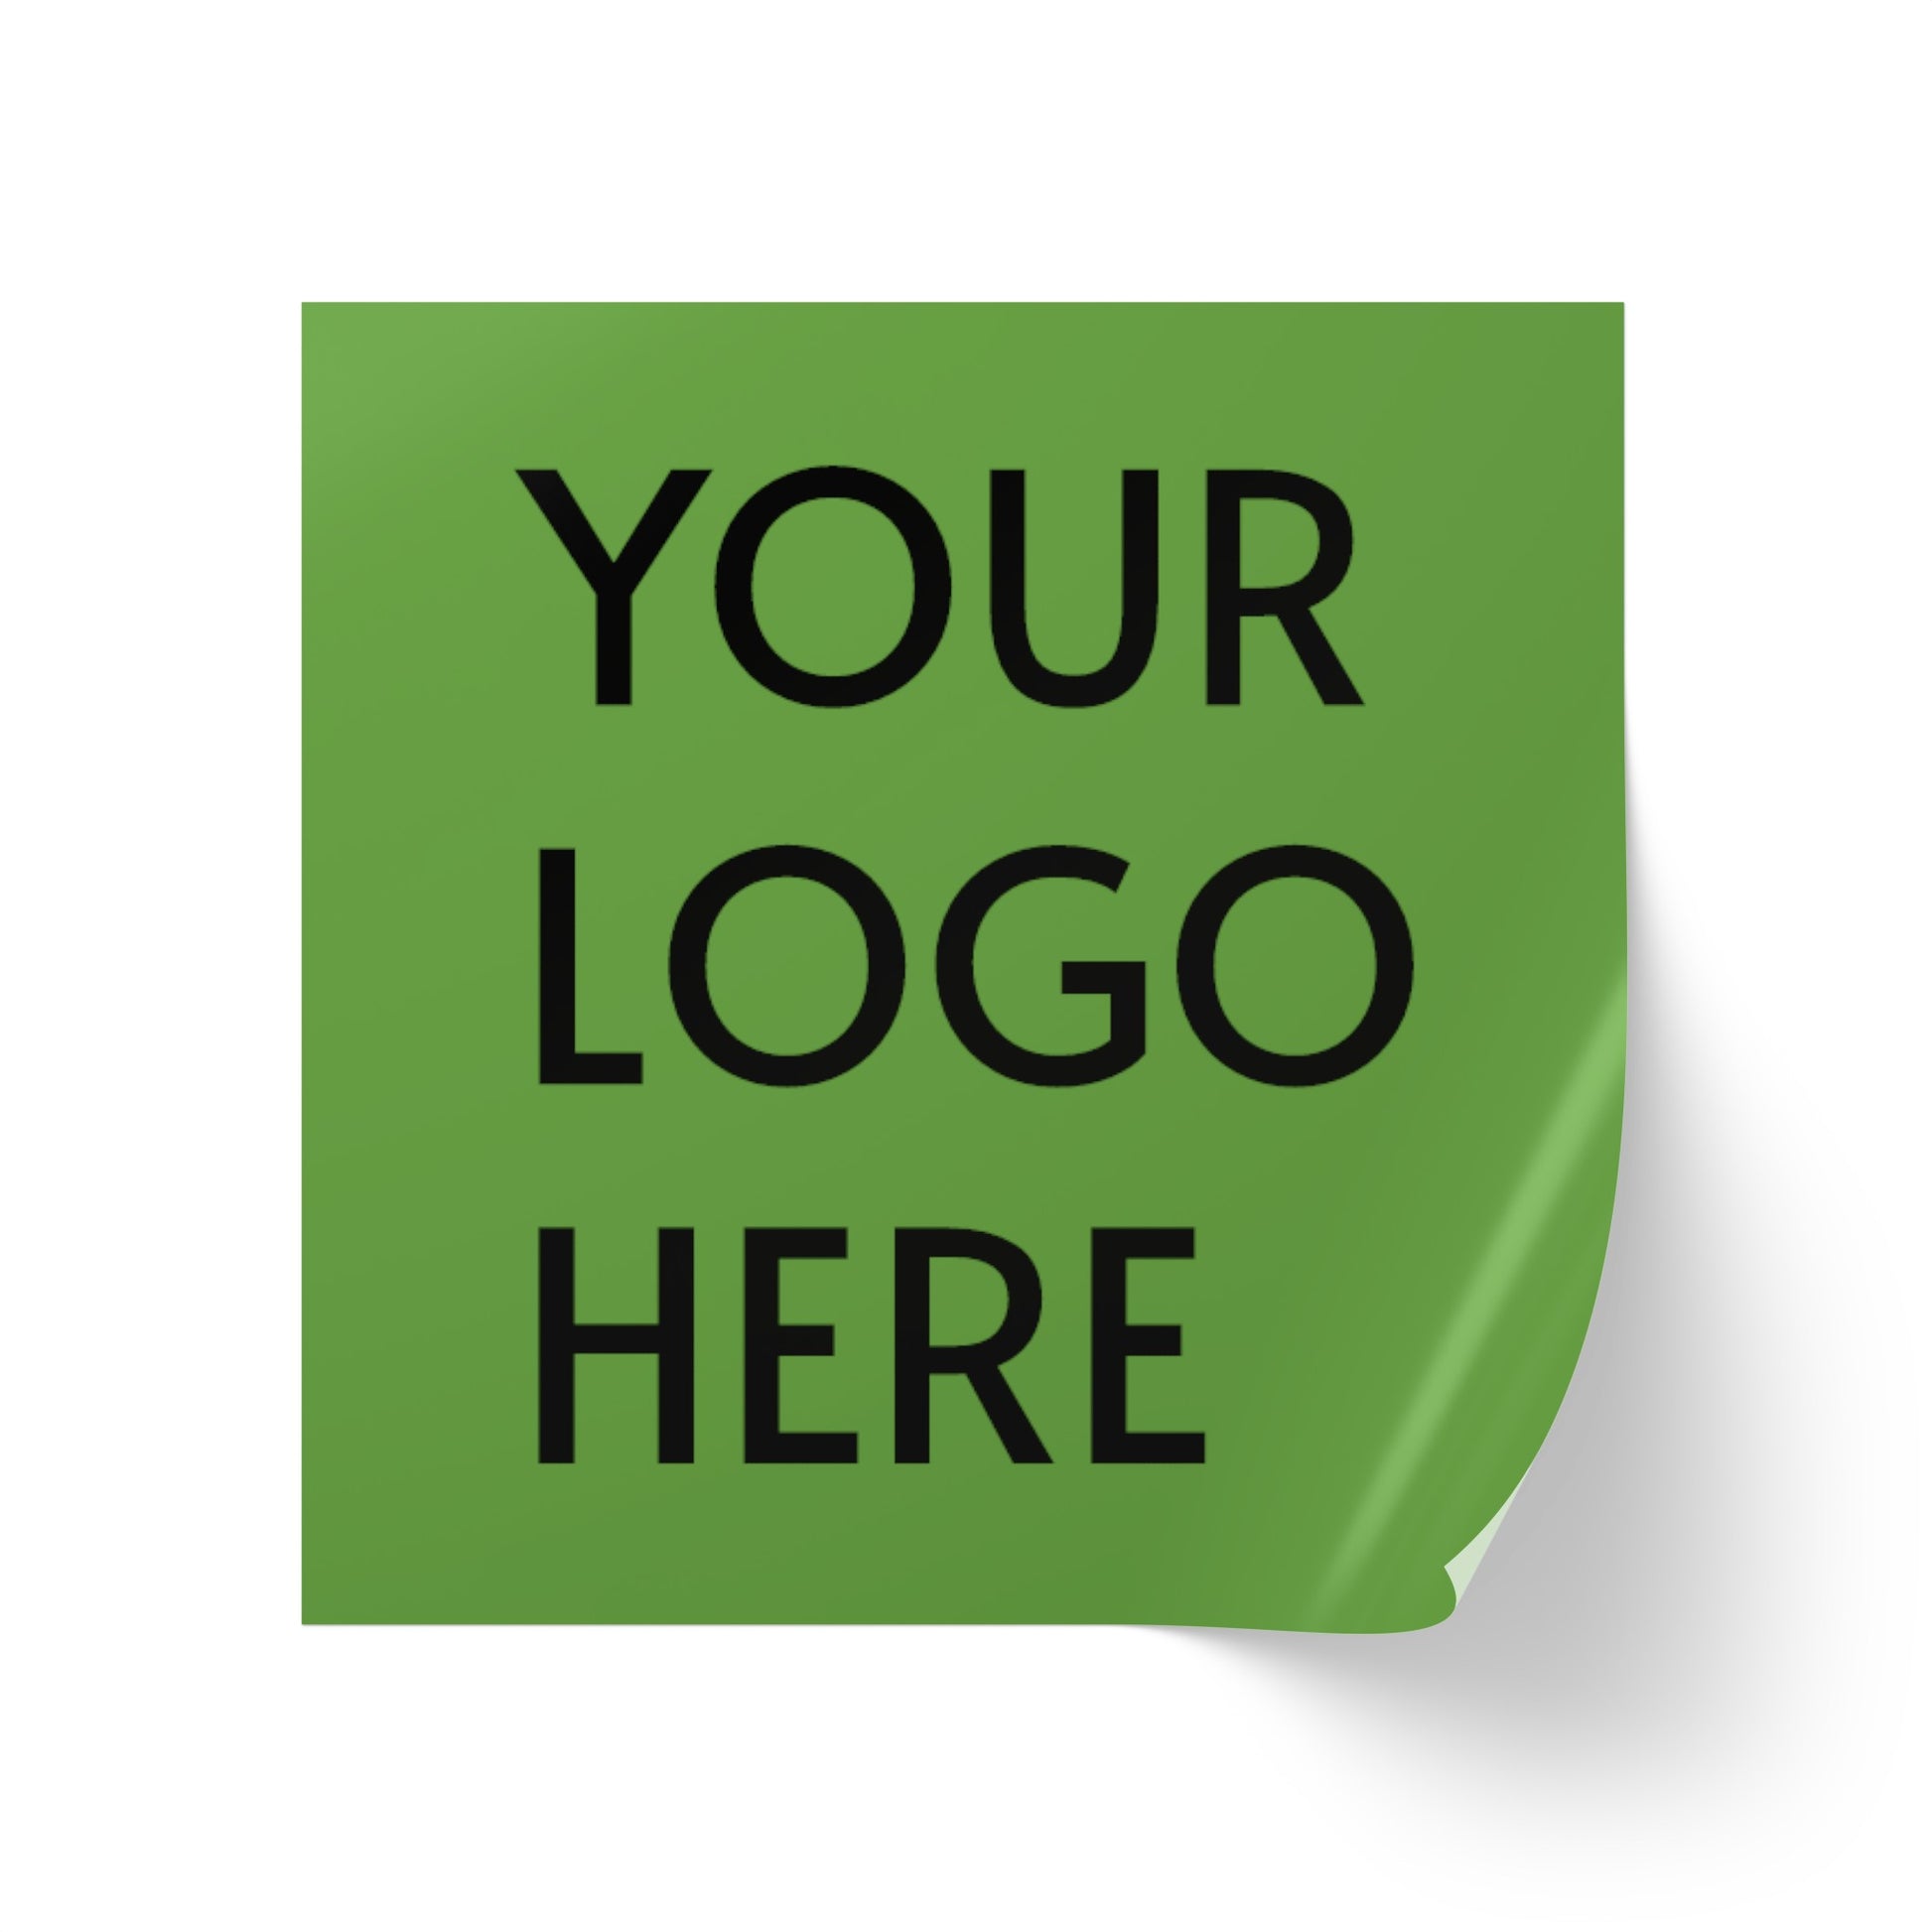 Durable custom square sticker labels for business